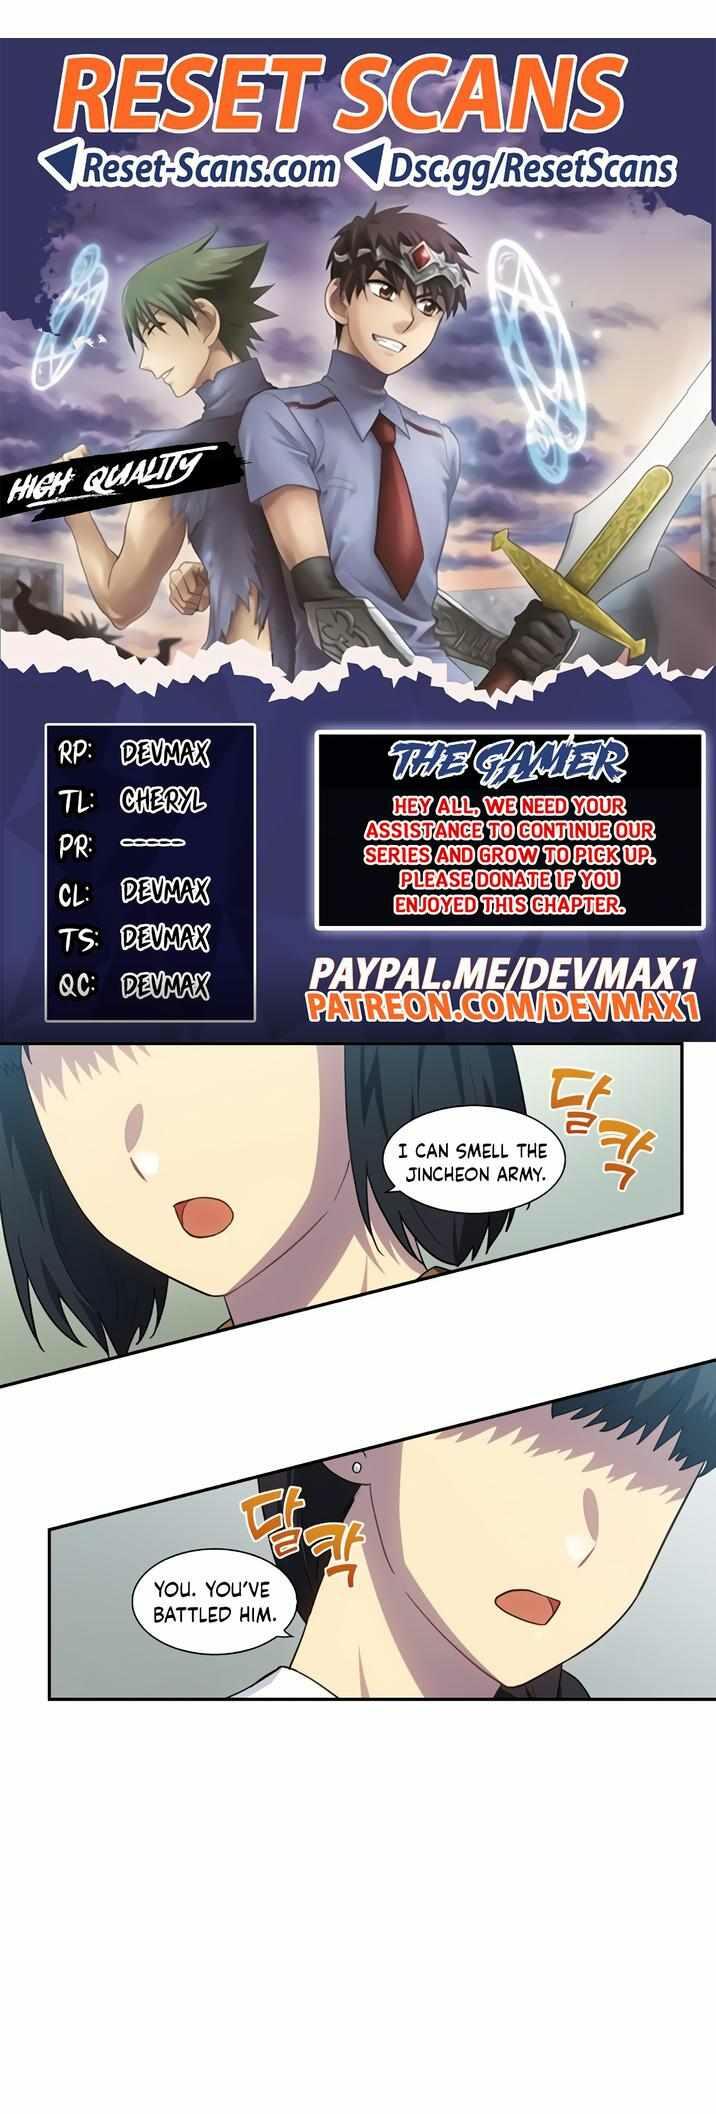 Read The Gamer Chapter 469 - Manganelo